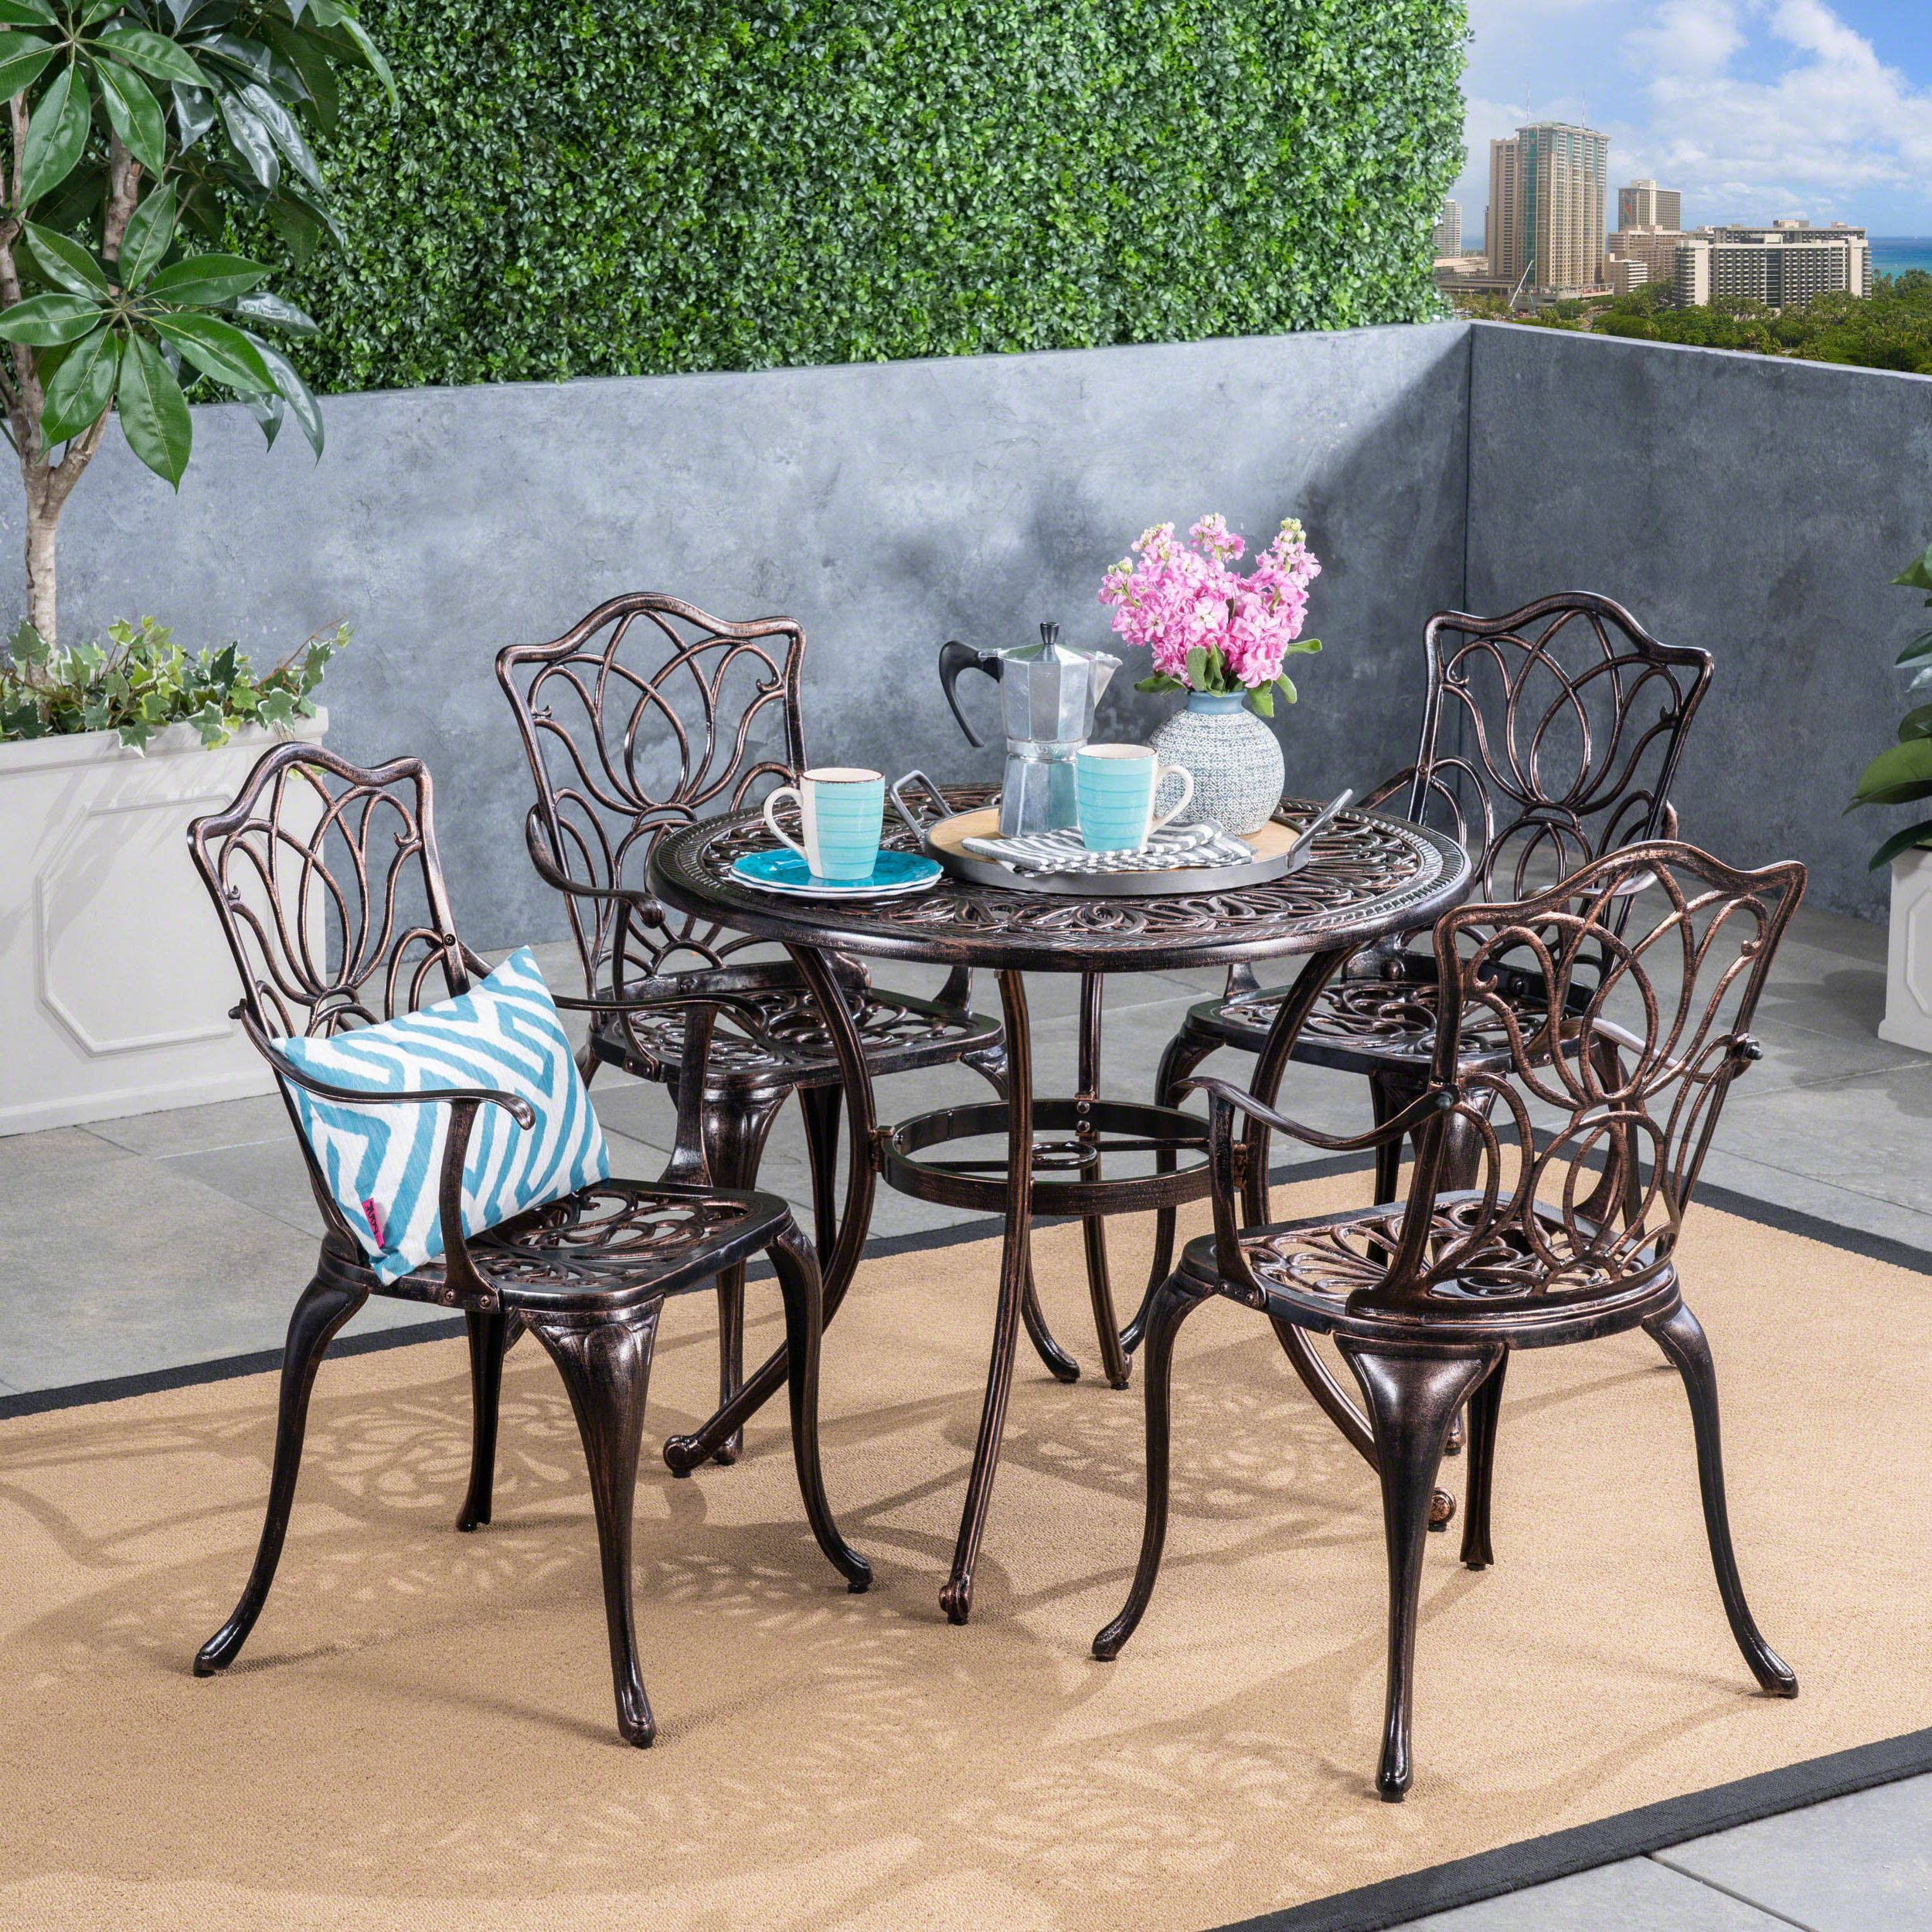 Clayton Outdoor 5 Piece Cast Aluminum Round Table Dining Set, Shiny Pertaining To 2019 5 Piece Round Dining Sets (View 6 of 15)